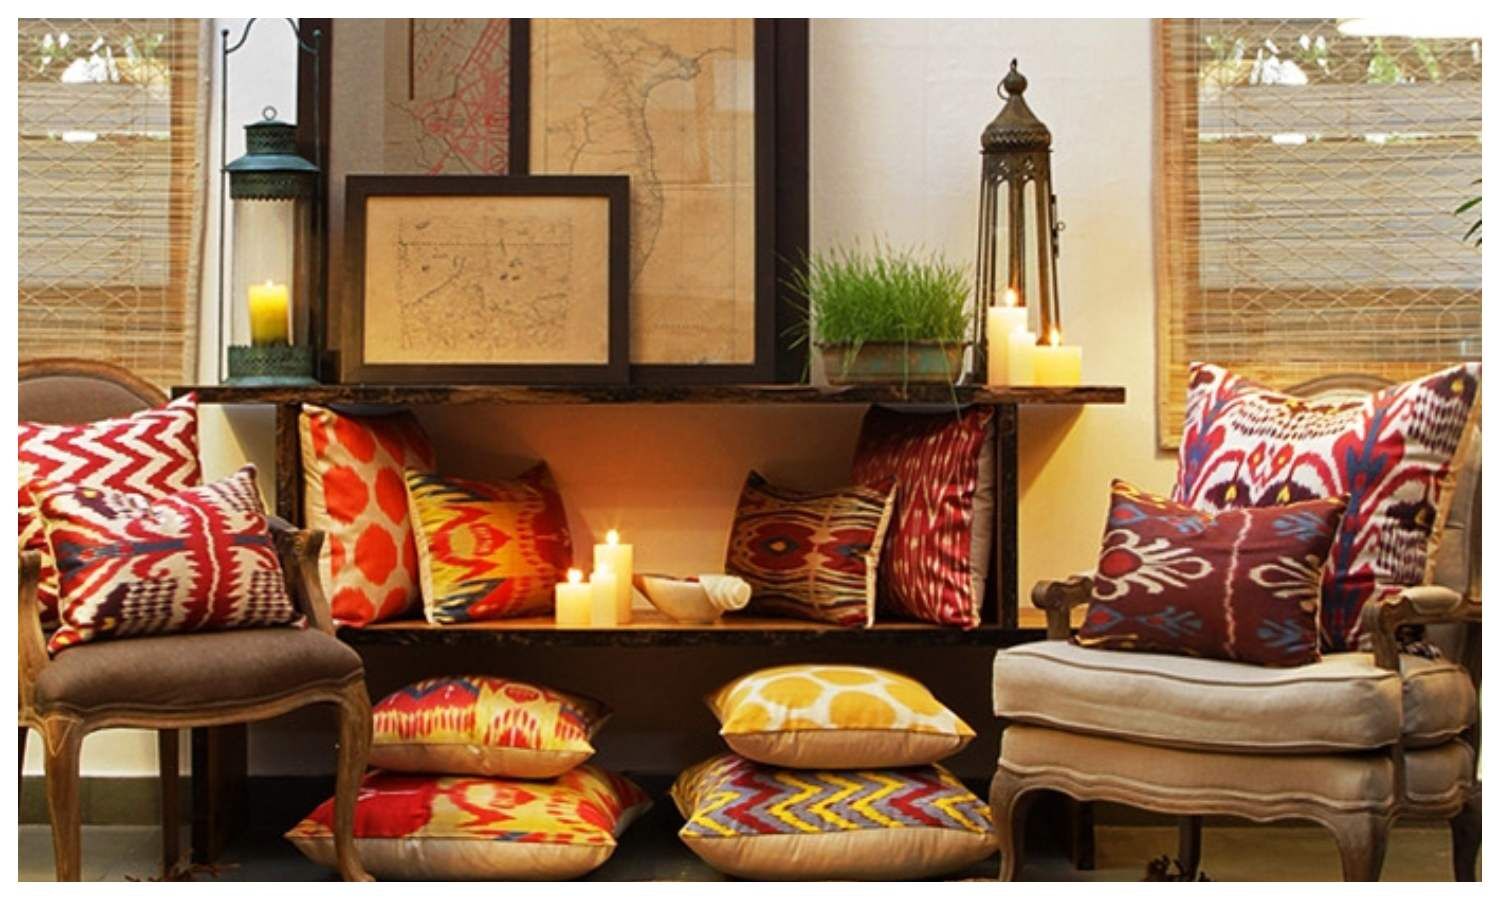 Home Decor Tips: Follow these tips to give a new and luxurious look to your home for the festive season